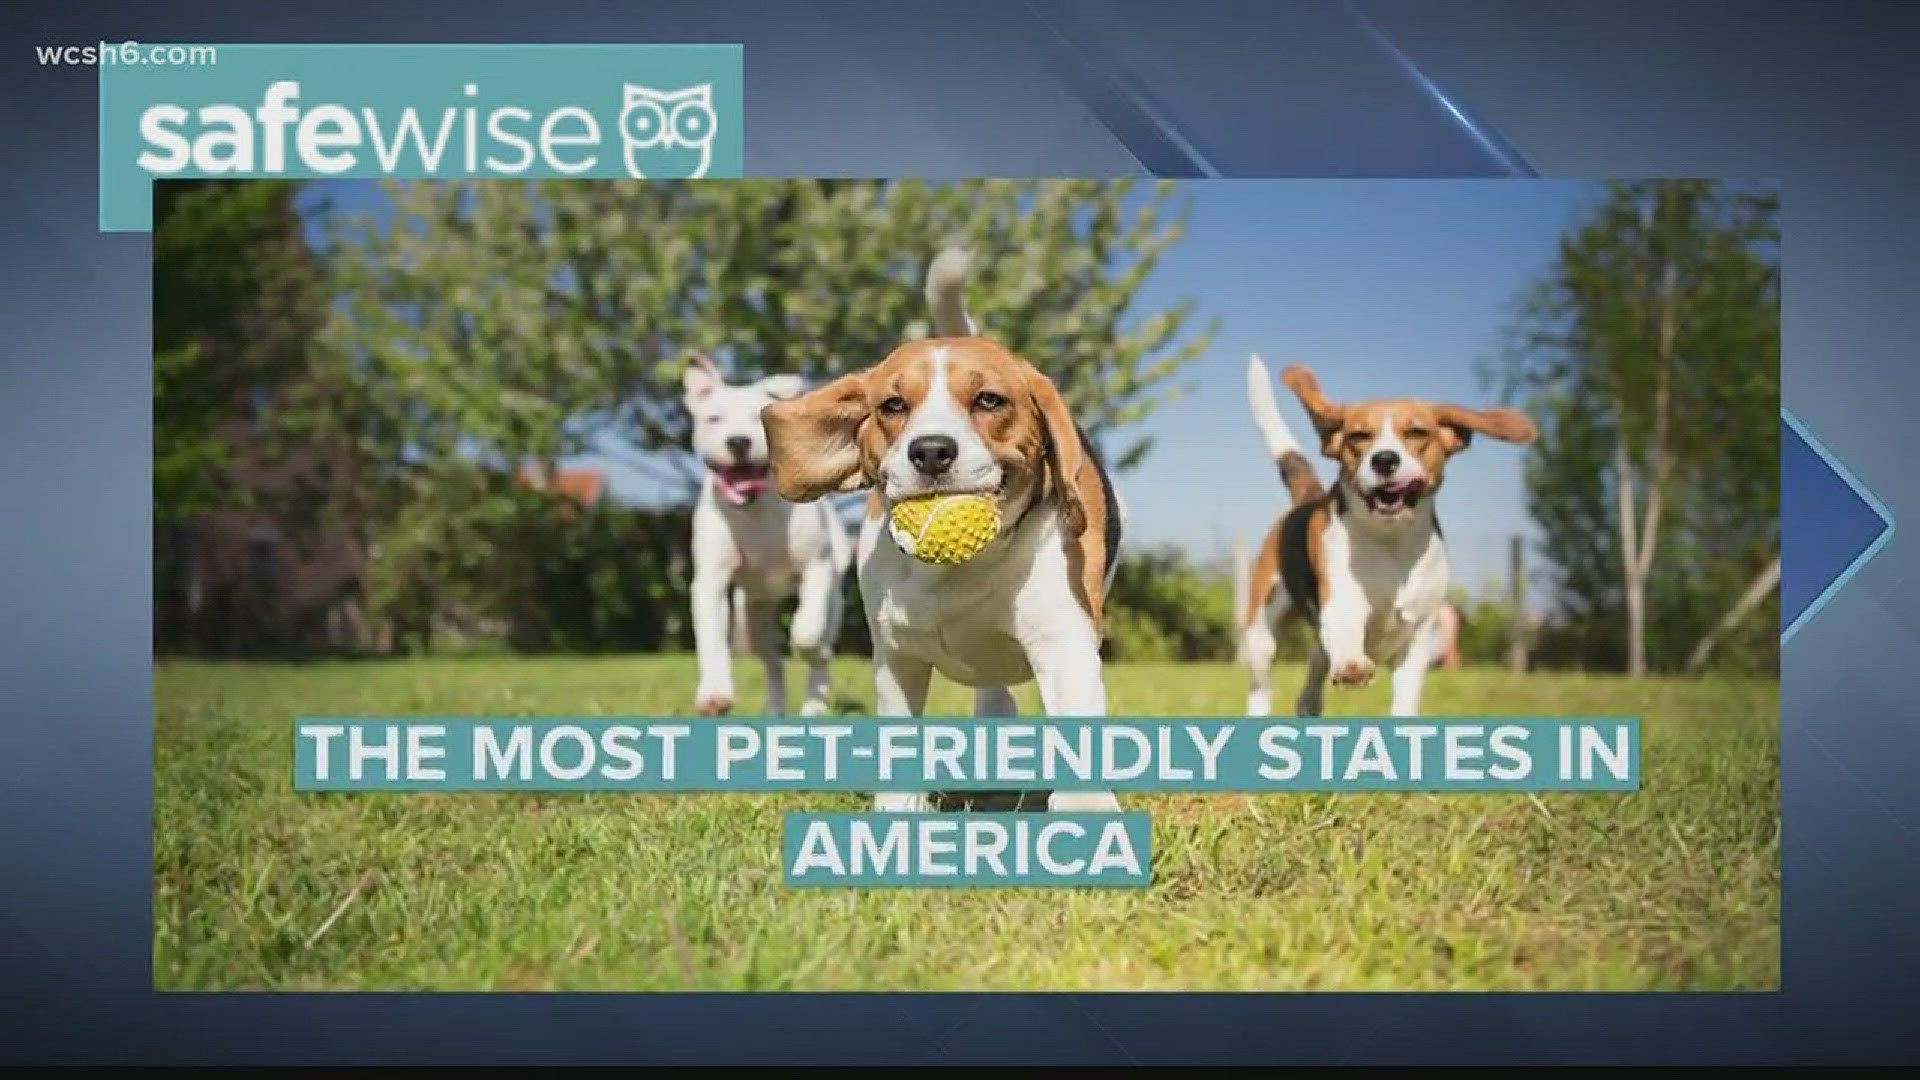 NOW: Report says Maine is the most pet-friendly state in the country